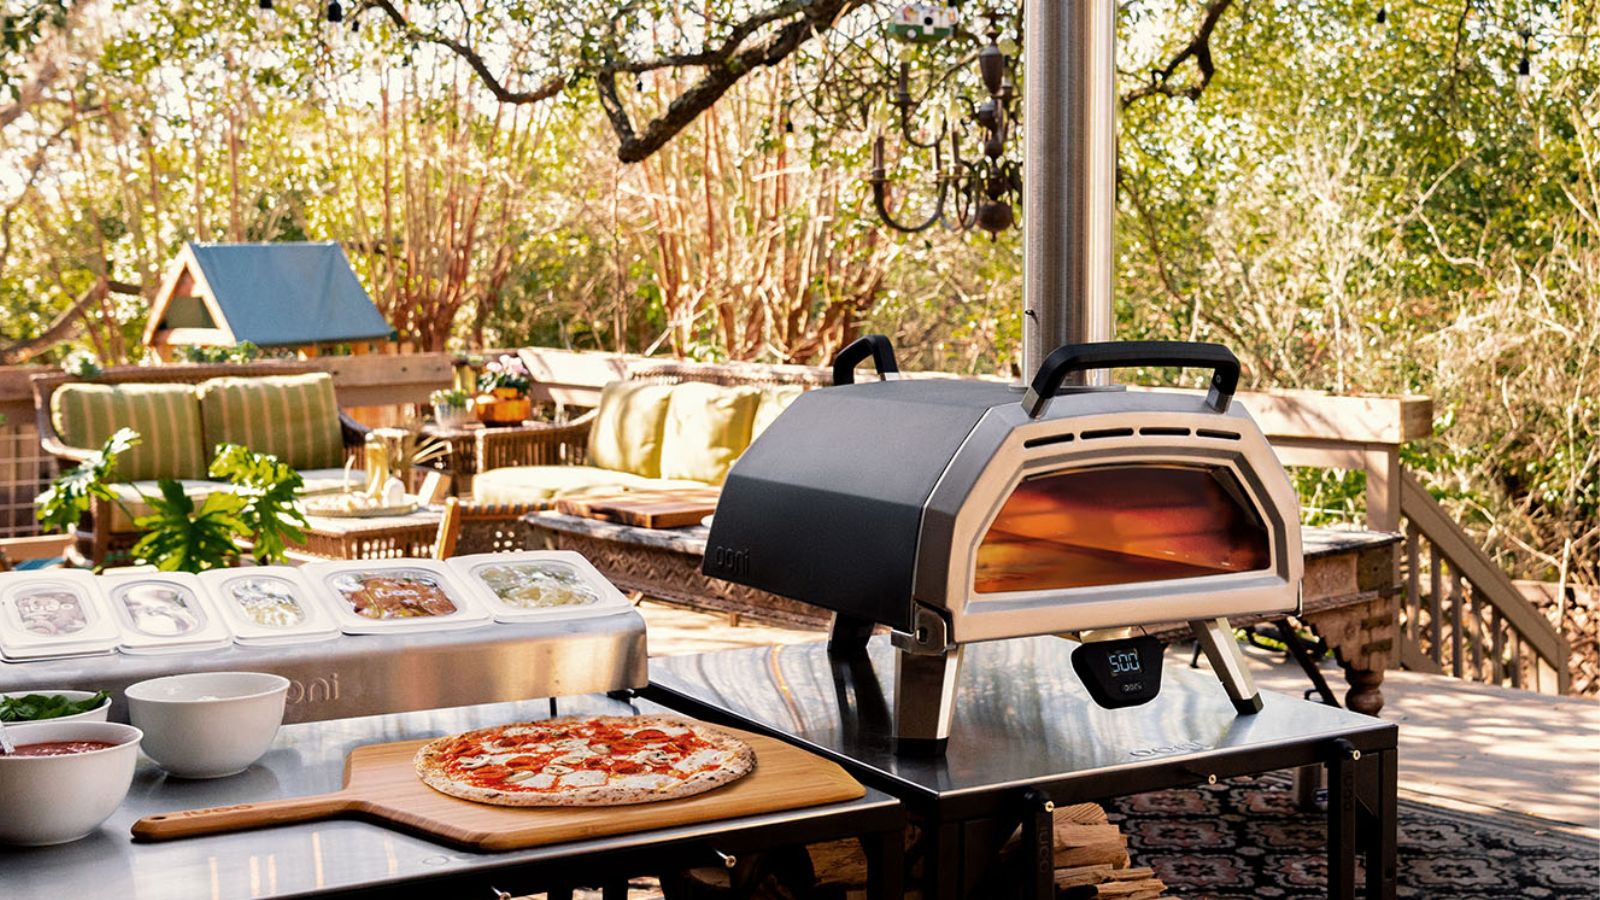 Outdoor Ovens  BBQ & Wood Fired Pizza Ovens - Ninja UK